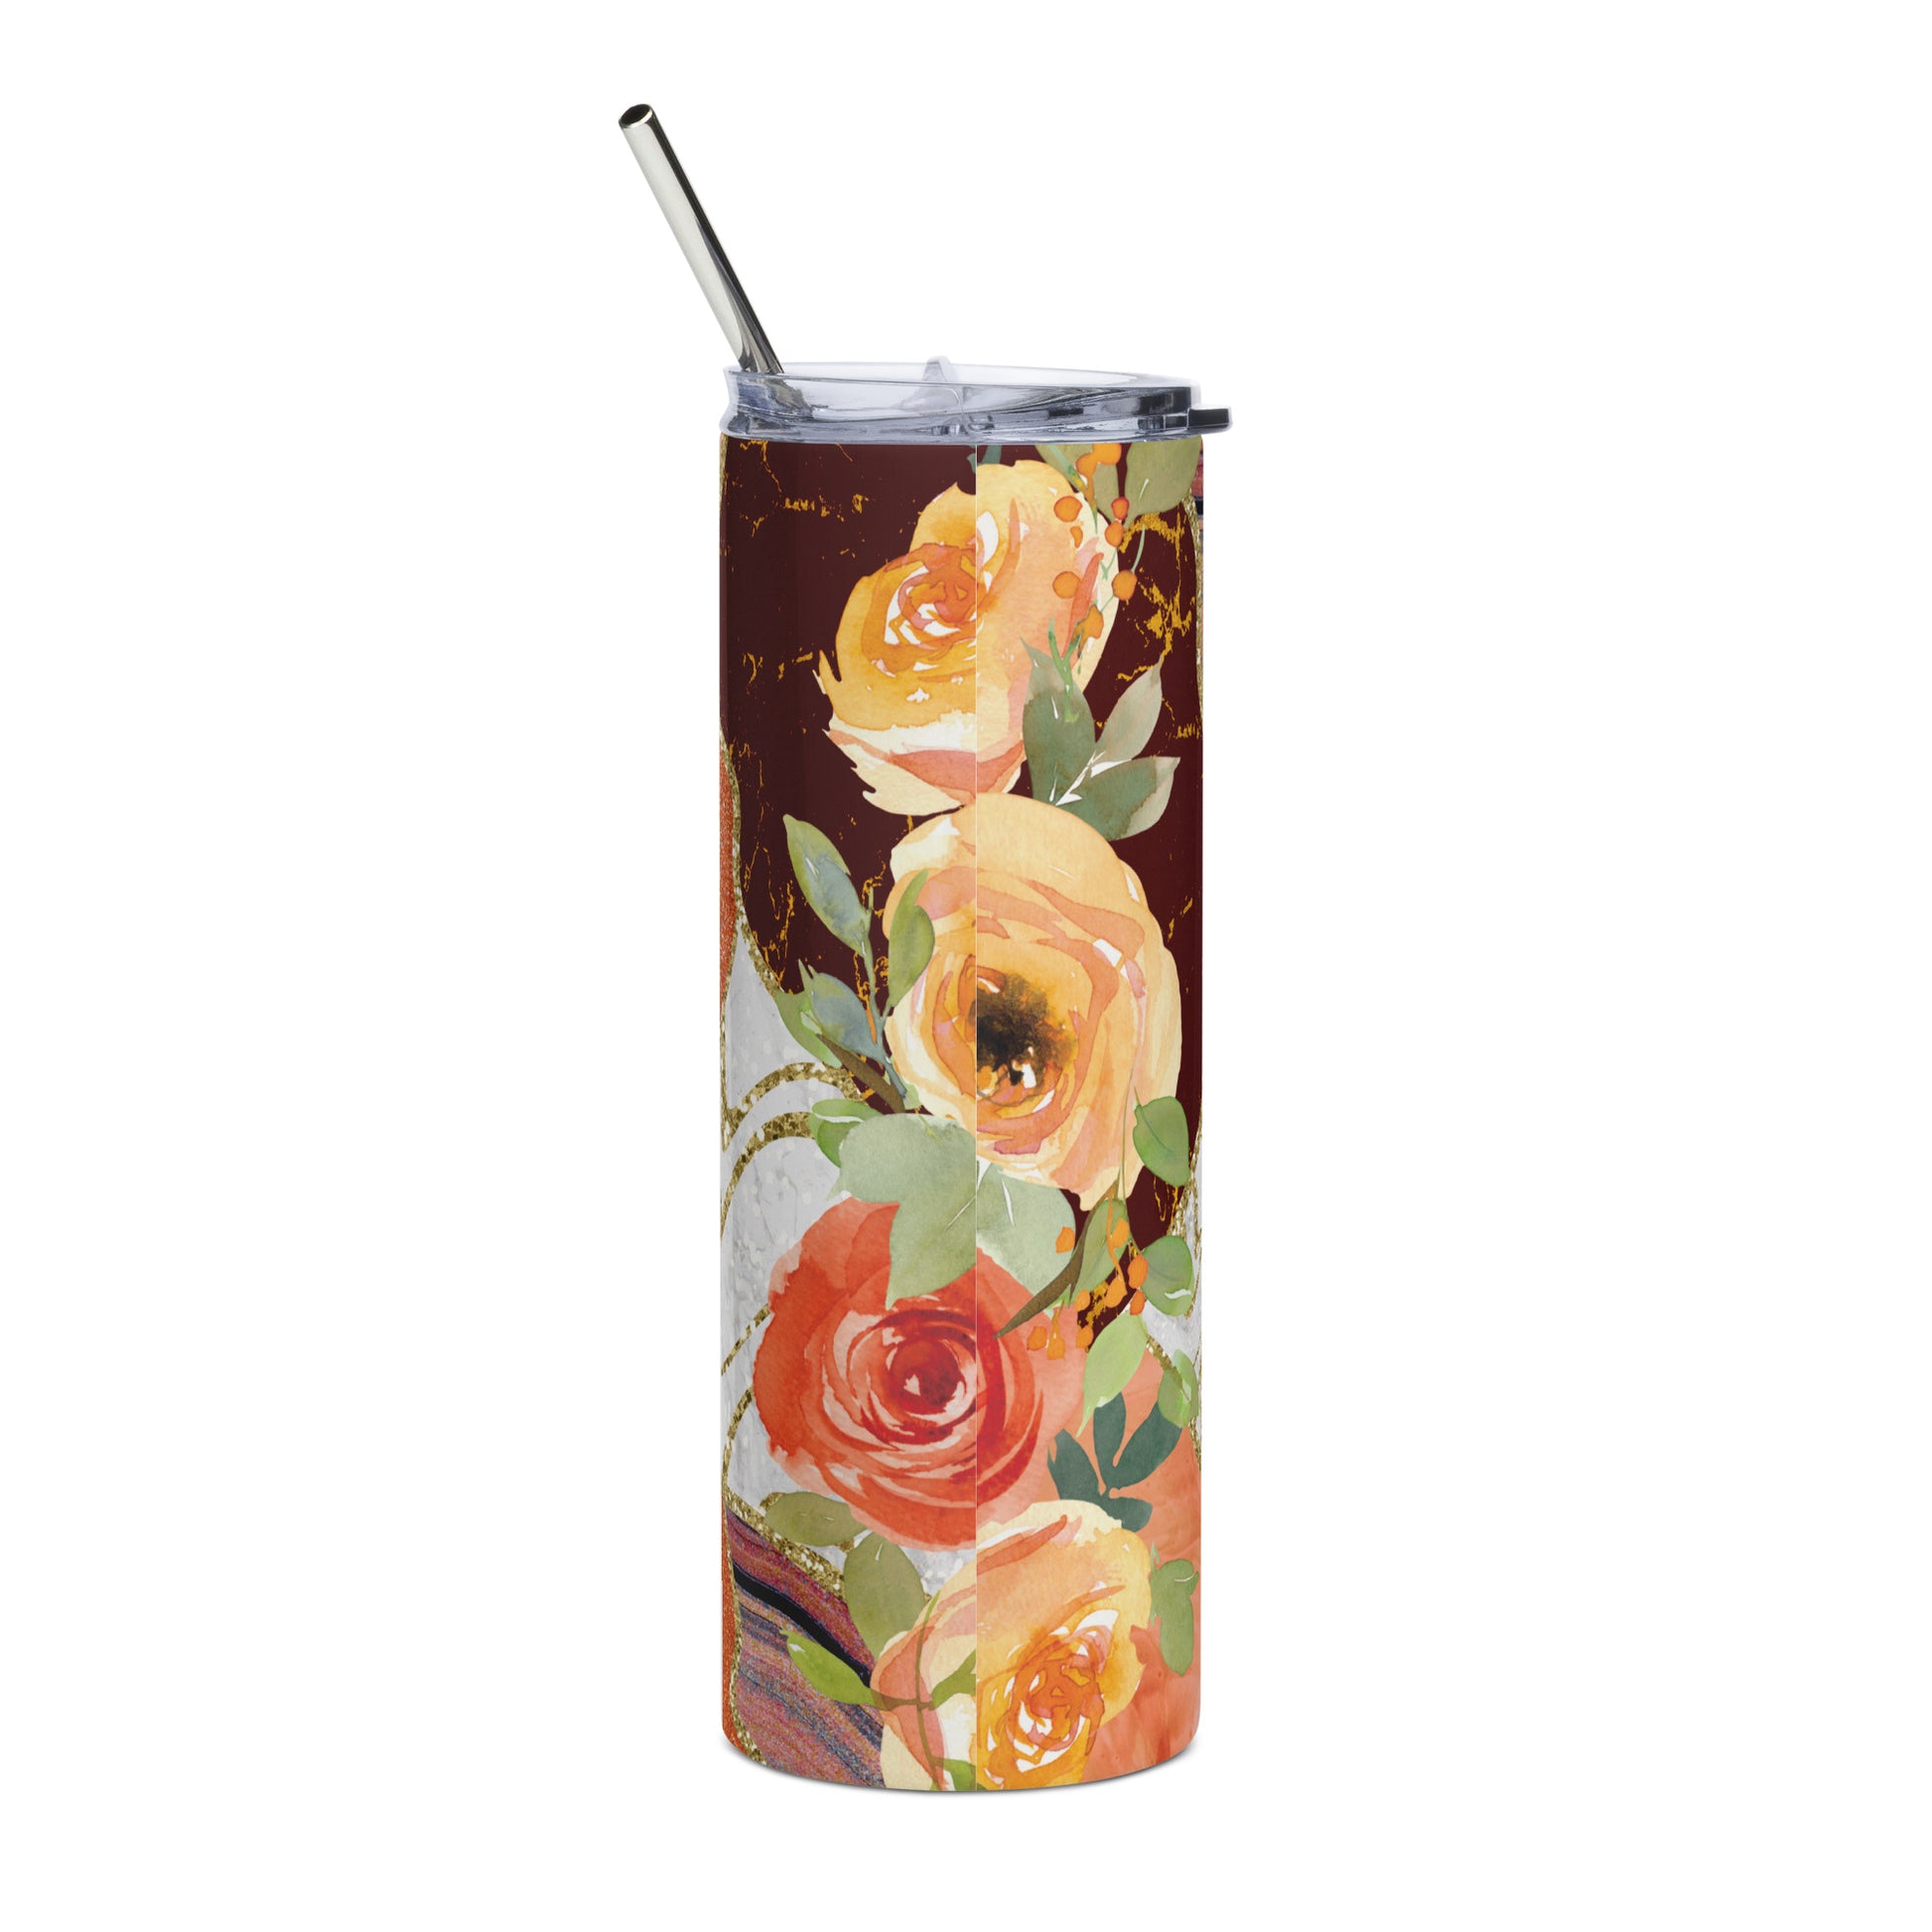 The back of the tumbler showcases a high-quality stainless steel surface, ensuring durability and a sleek aesthetic, perfect for showcasing the uplifting message.